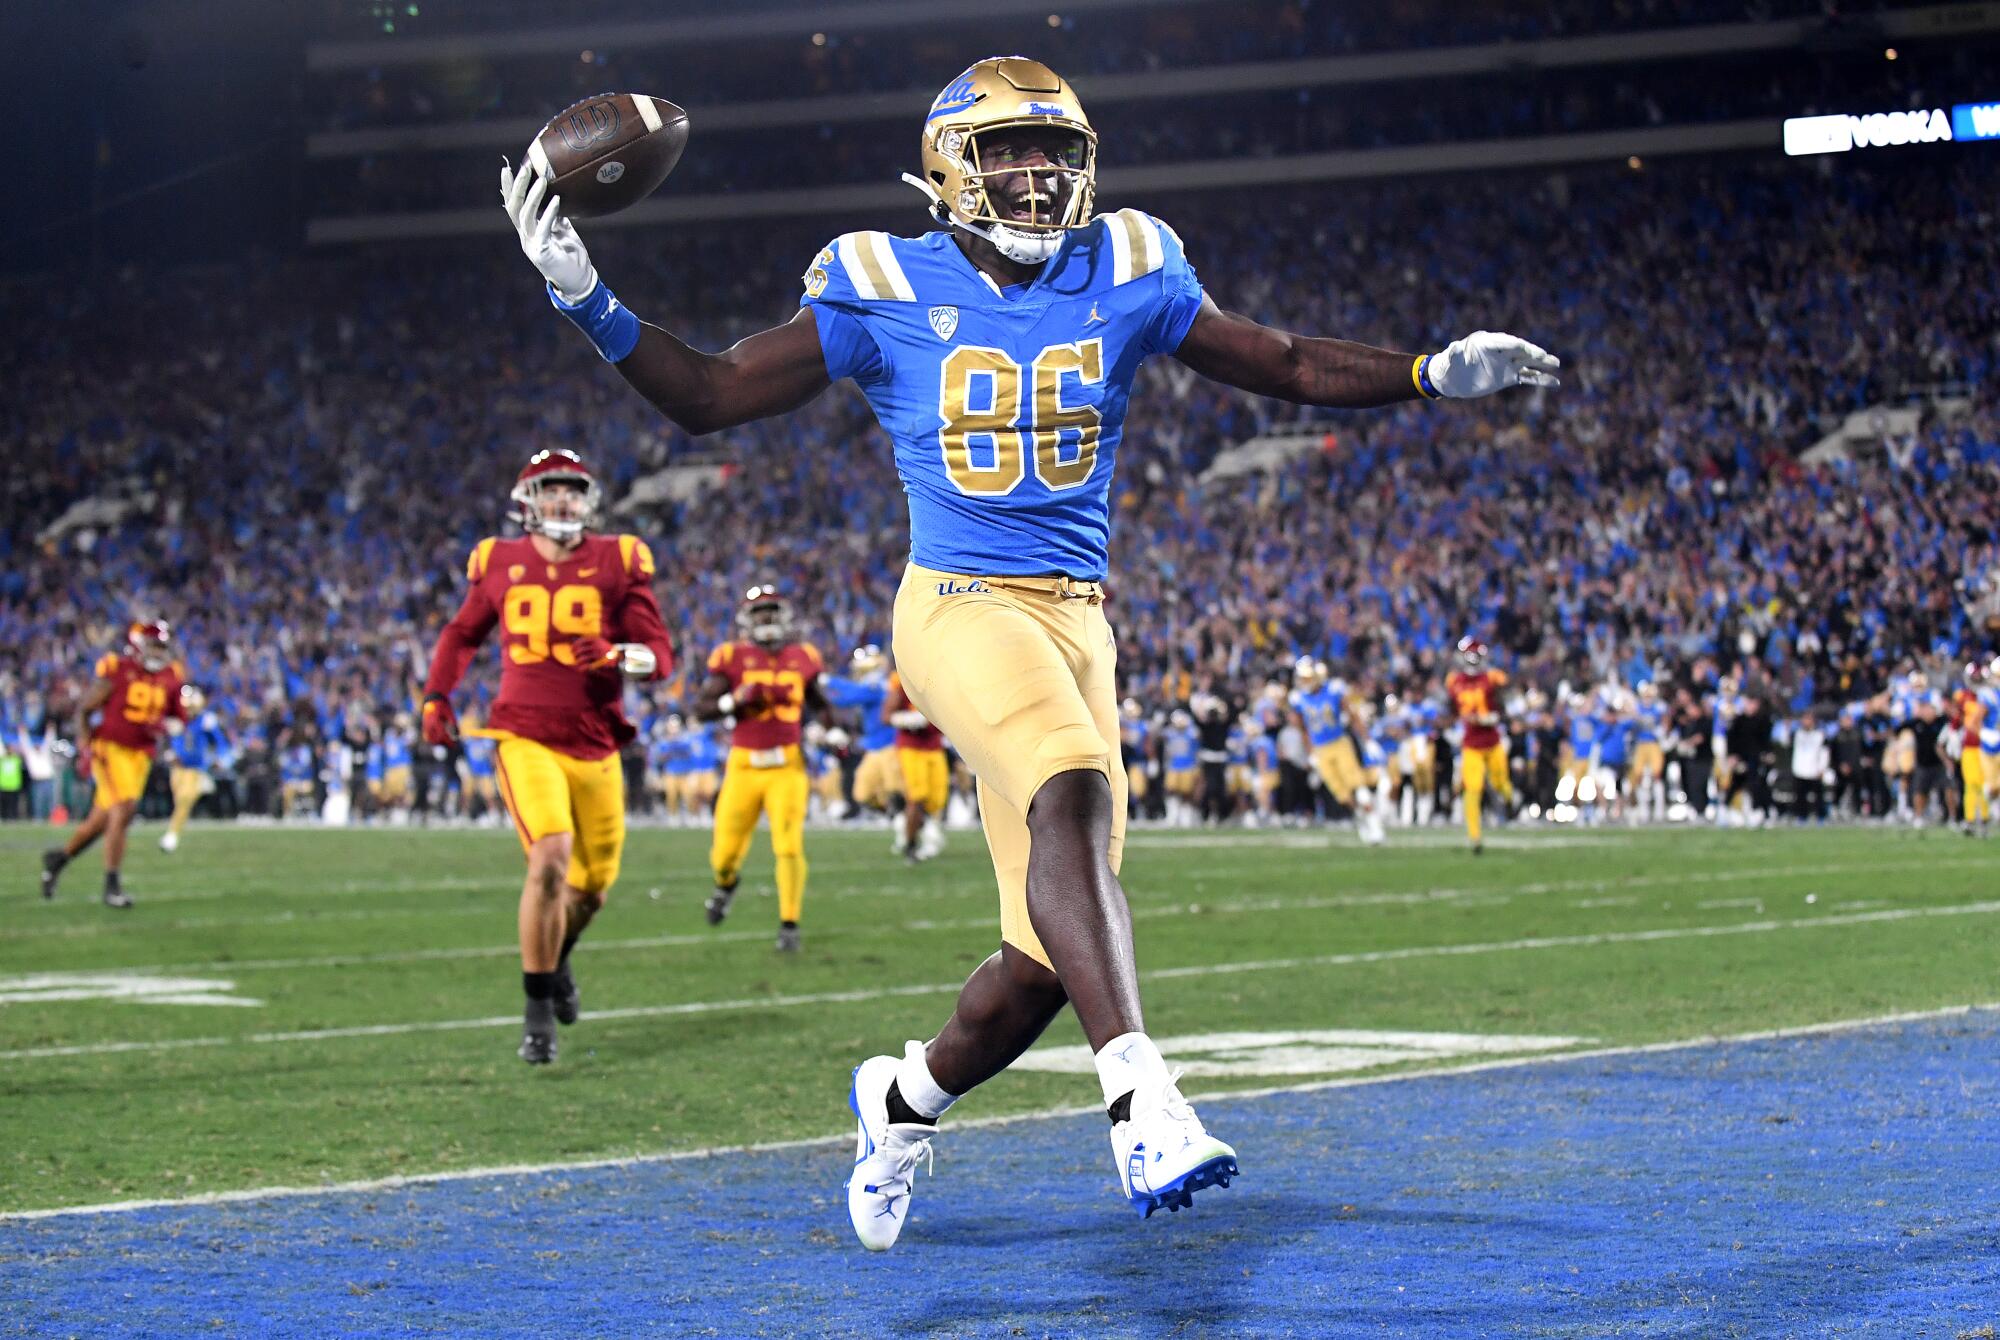 UCLA tight end Michael Ezeike celebrates a touchdown catch during the first quarter.